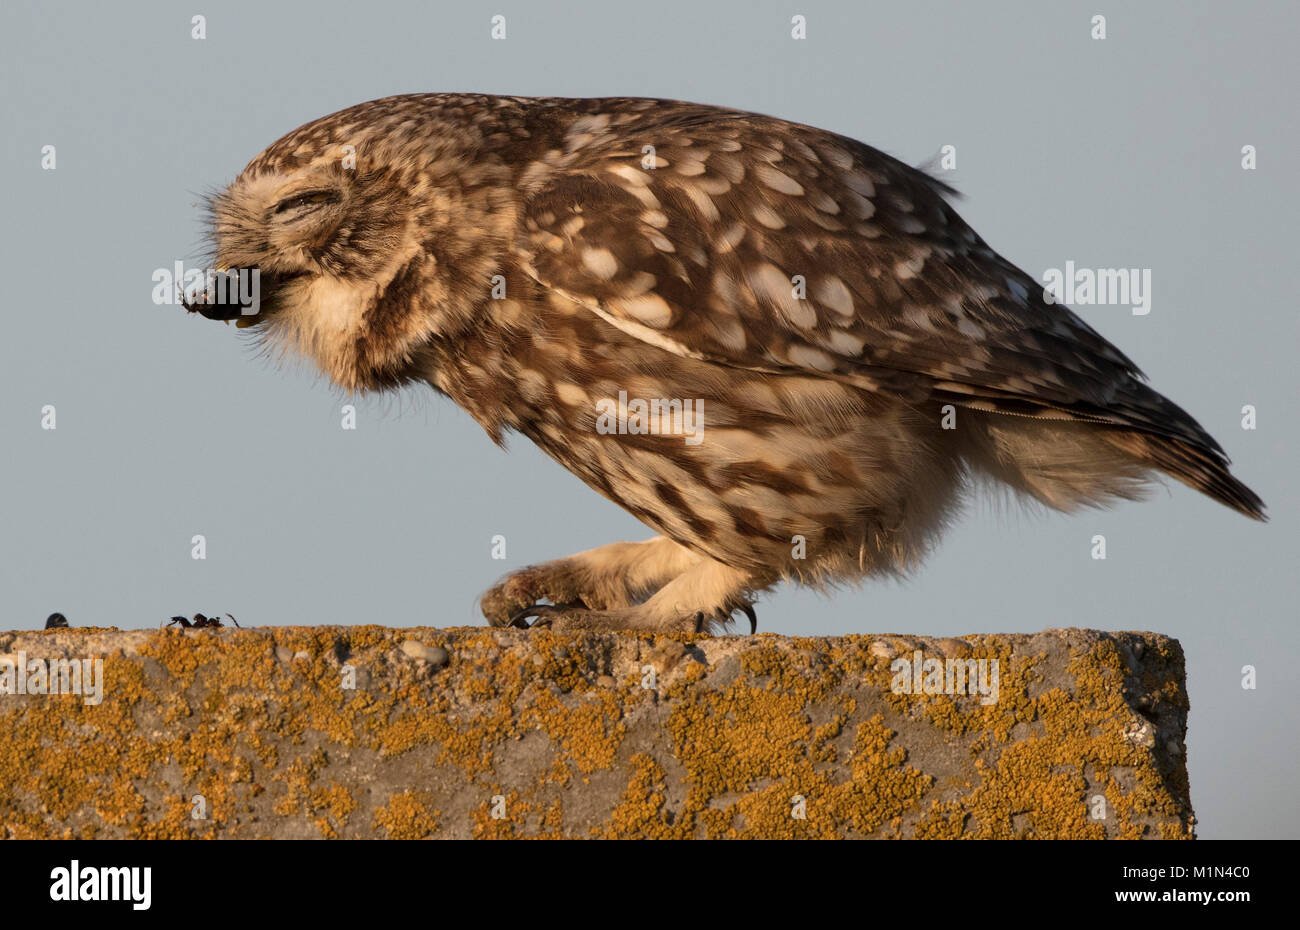 Little Owl swallowing a beetle Stock Photo